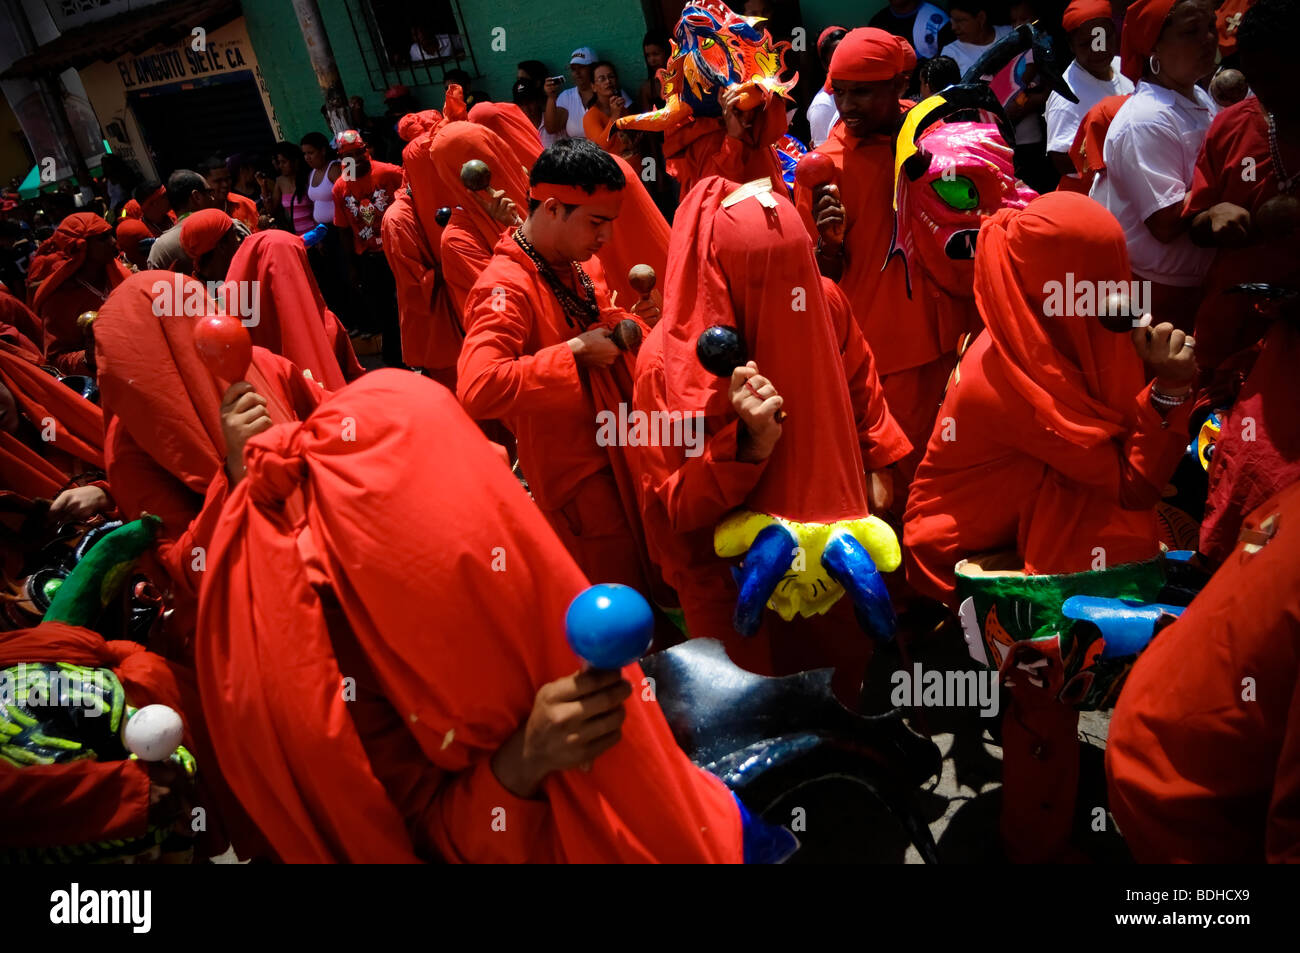 Men dressed in red costumes dance with maracas to celebrate a festival Stock Photo